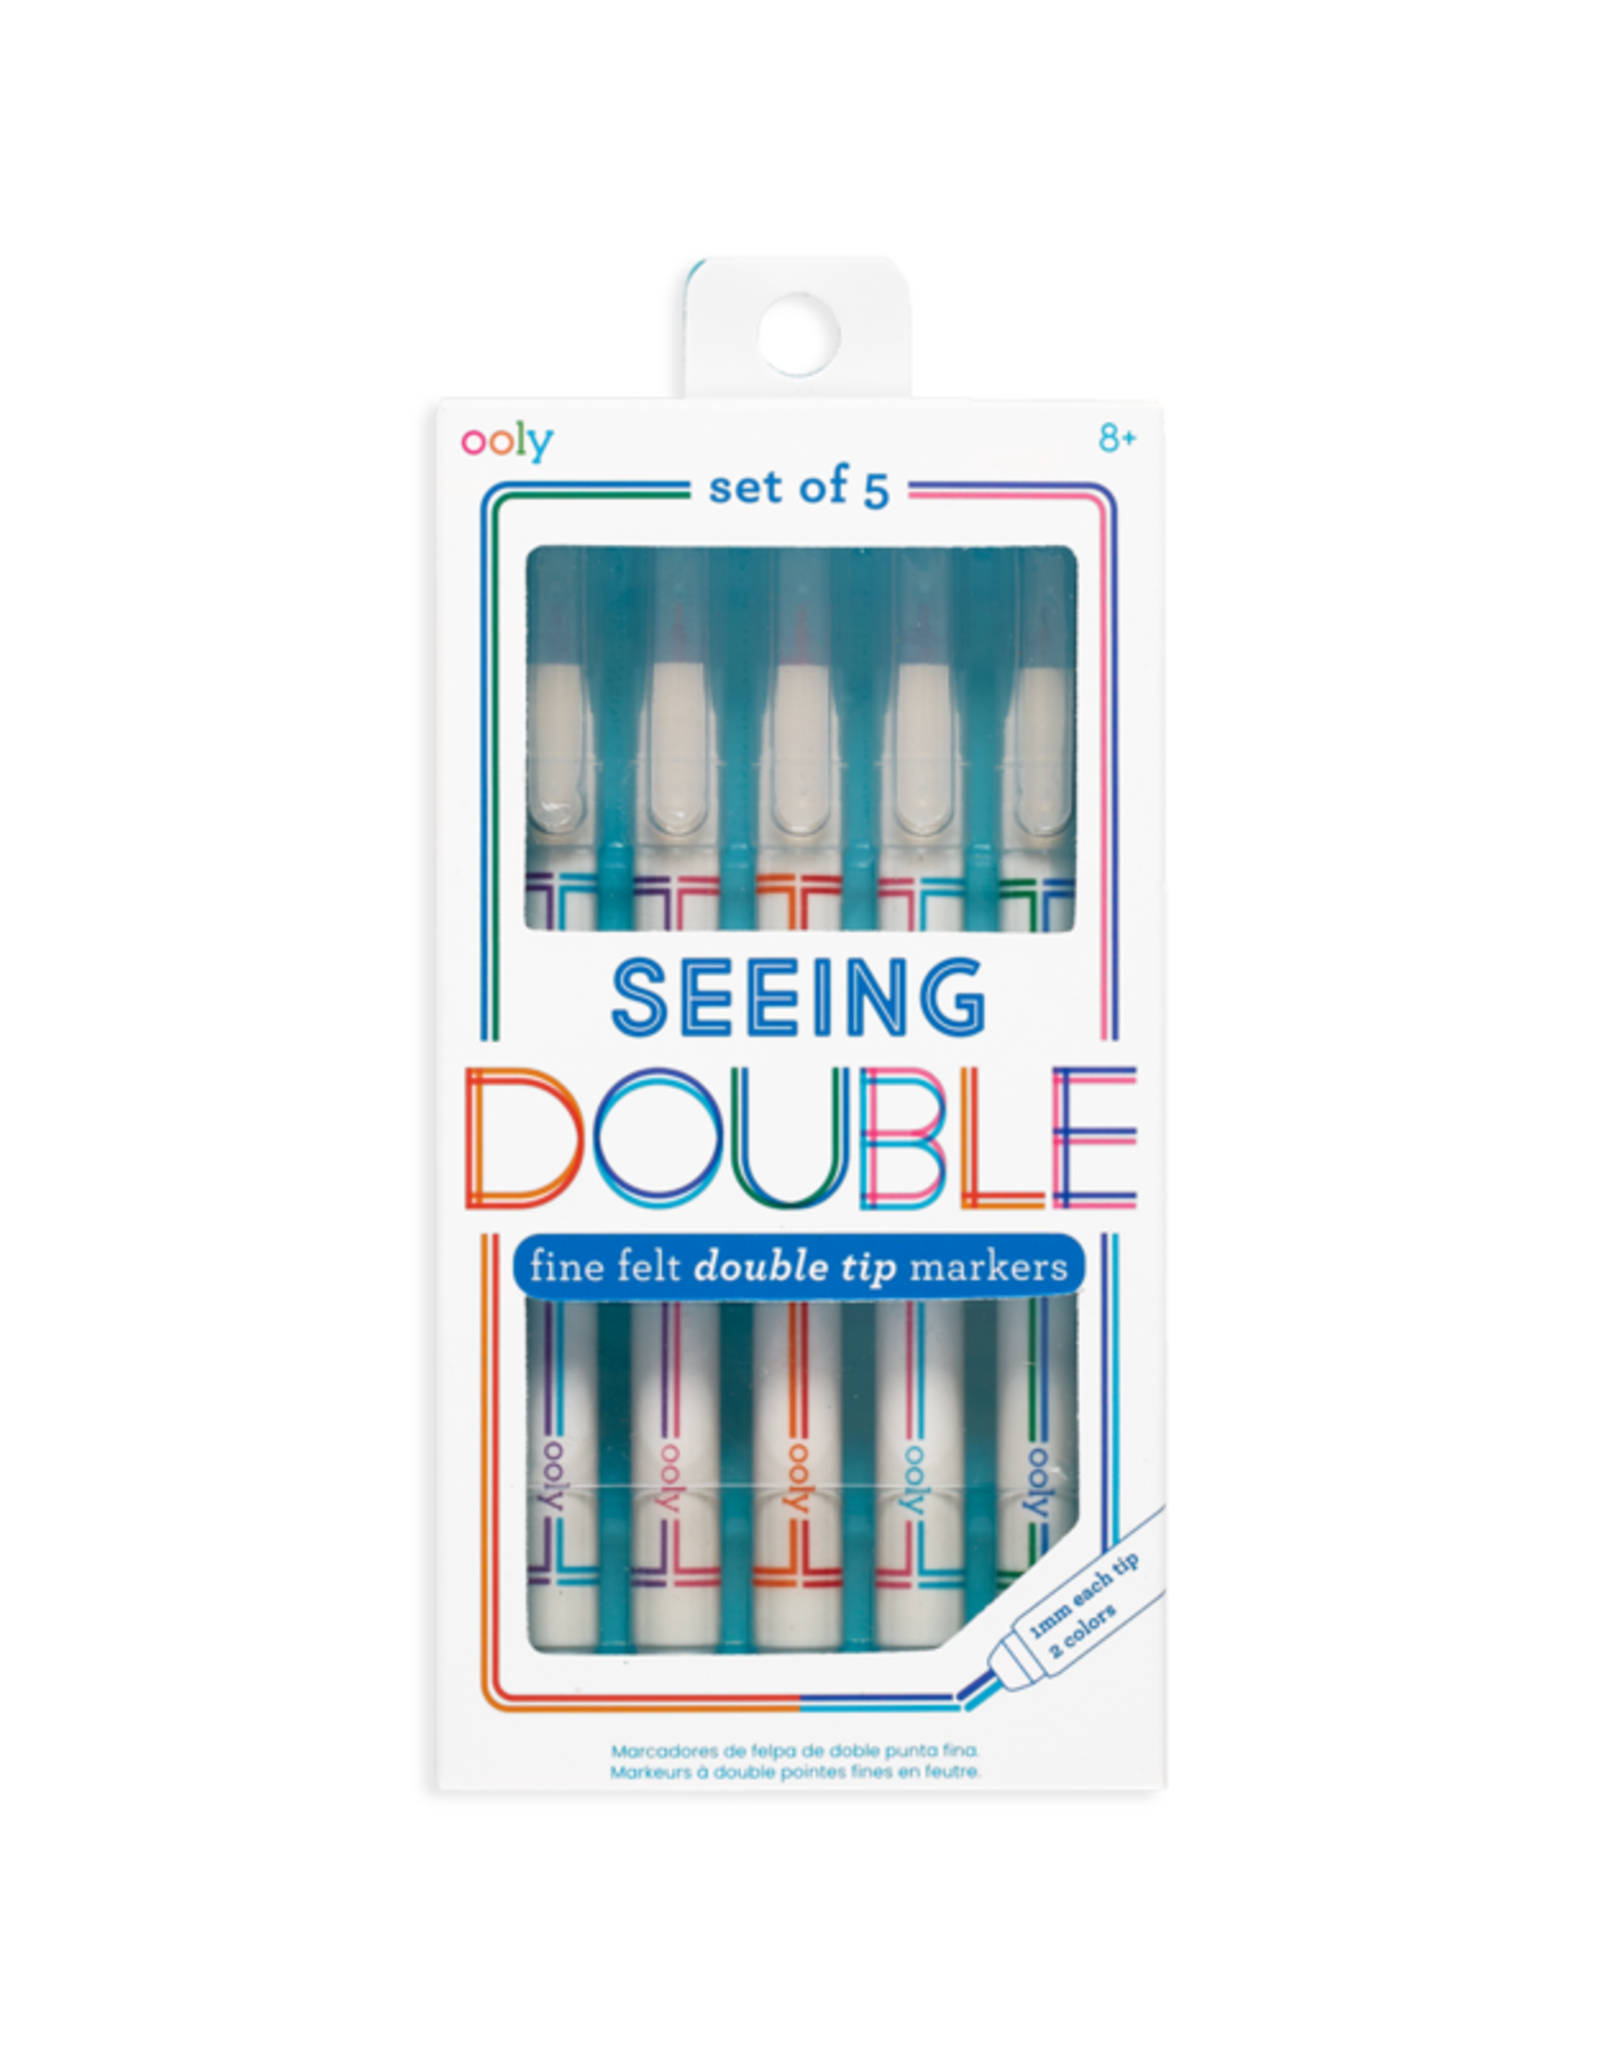 OOLY SEEING DOUBLE FINE FELT DOUBLE TIP MARKERS - SET OF 5 / 10 COLORS